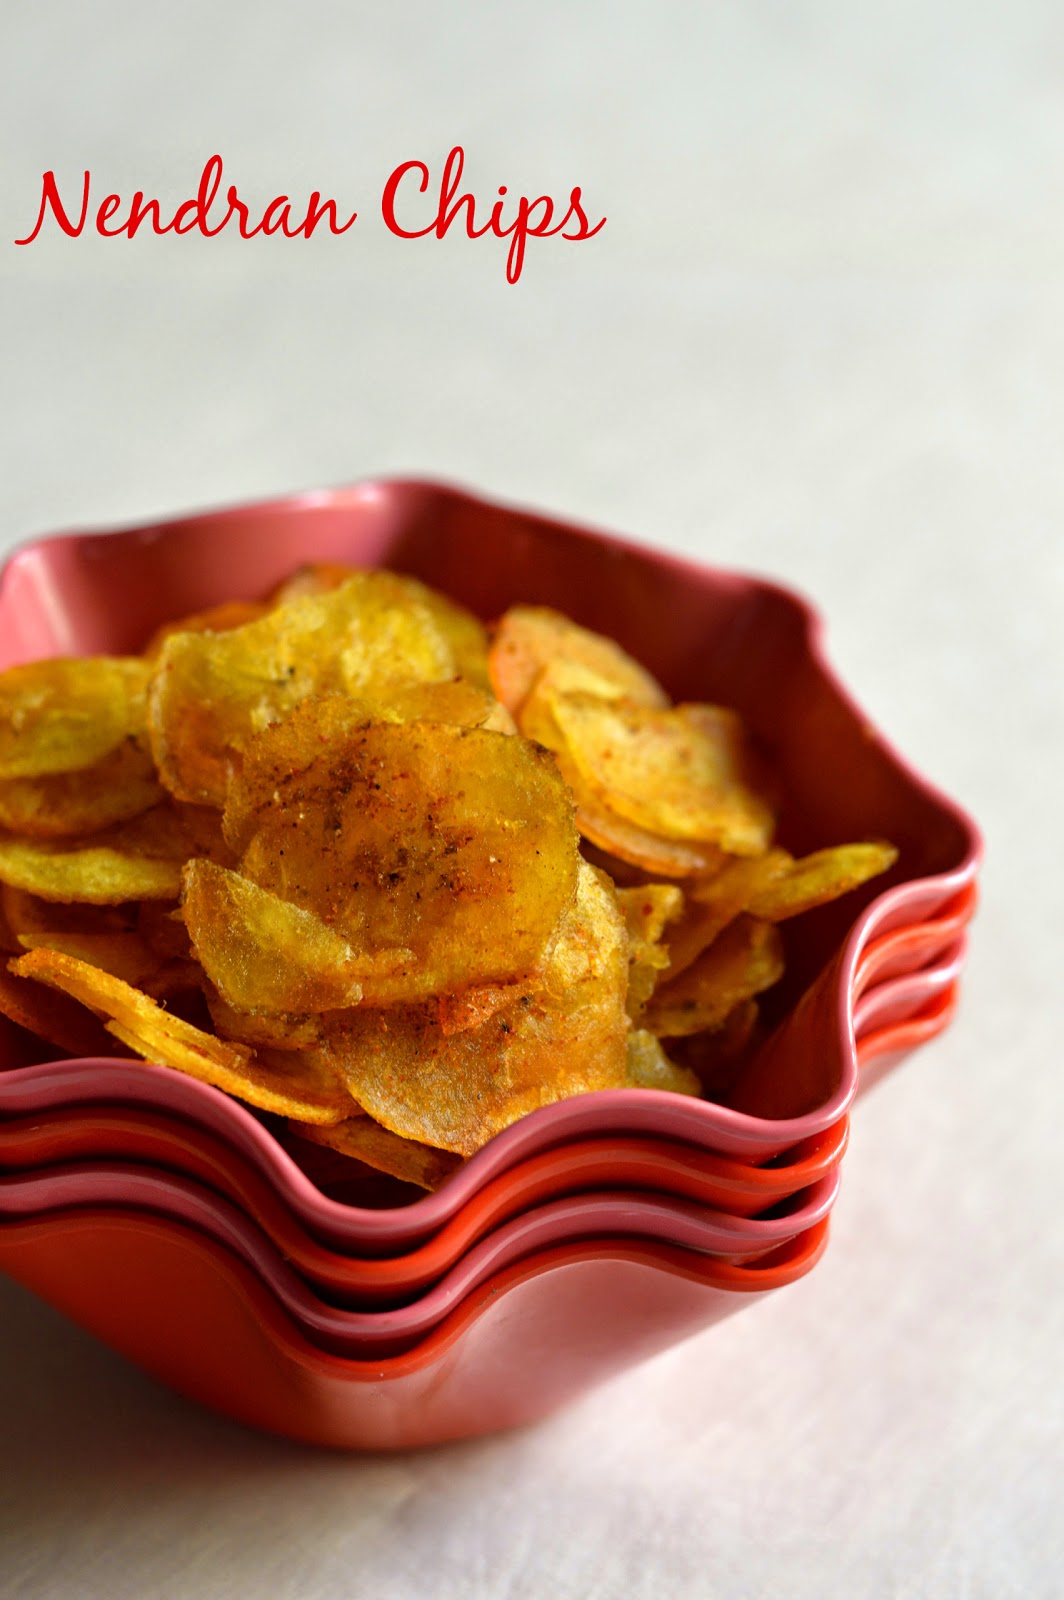  kerala nendran chips recipe step wise pictures, banana chips easy recipe at home, nendram pazham chips at home